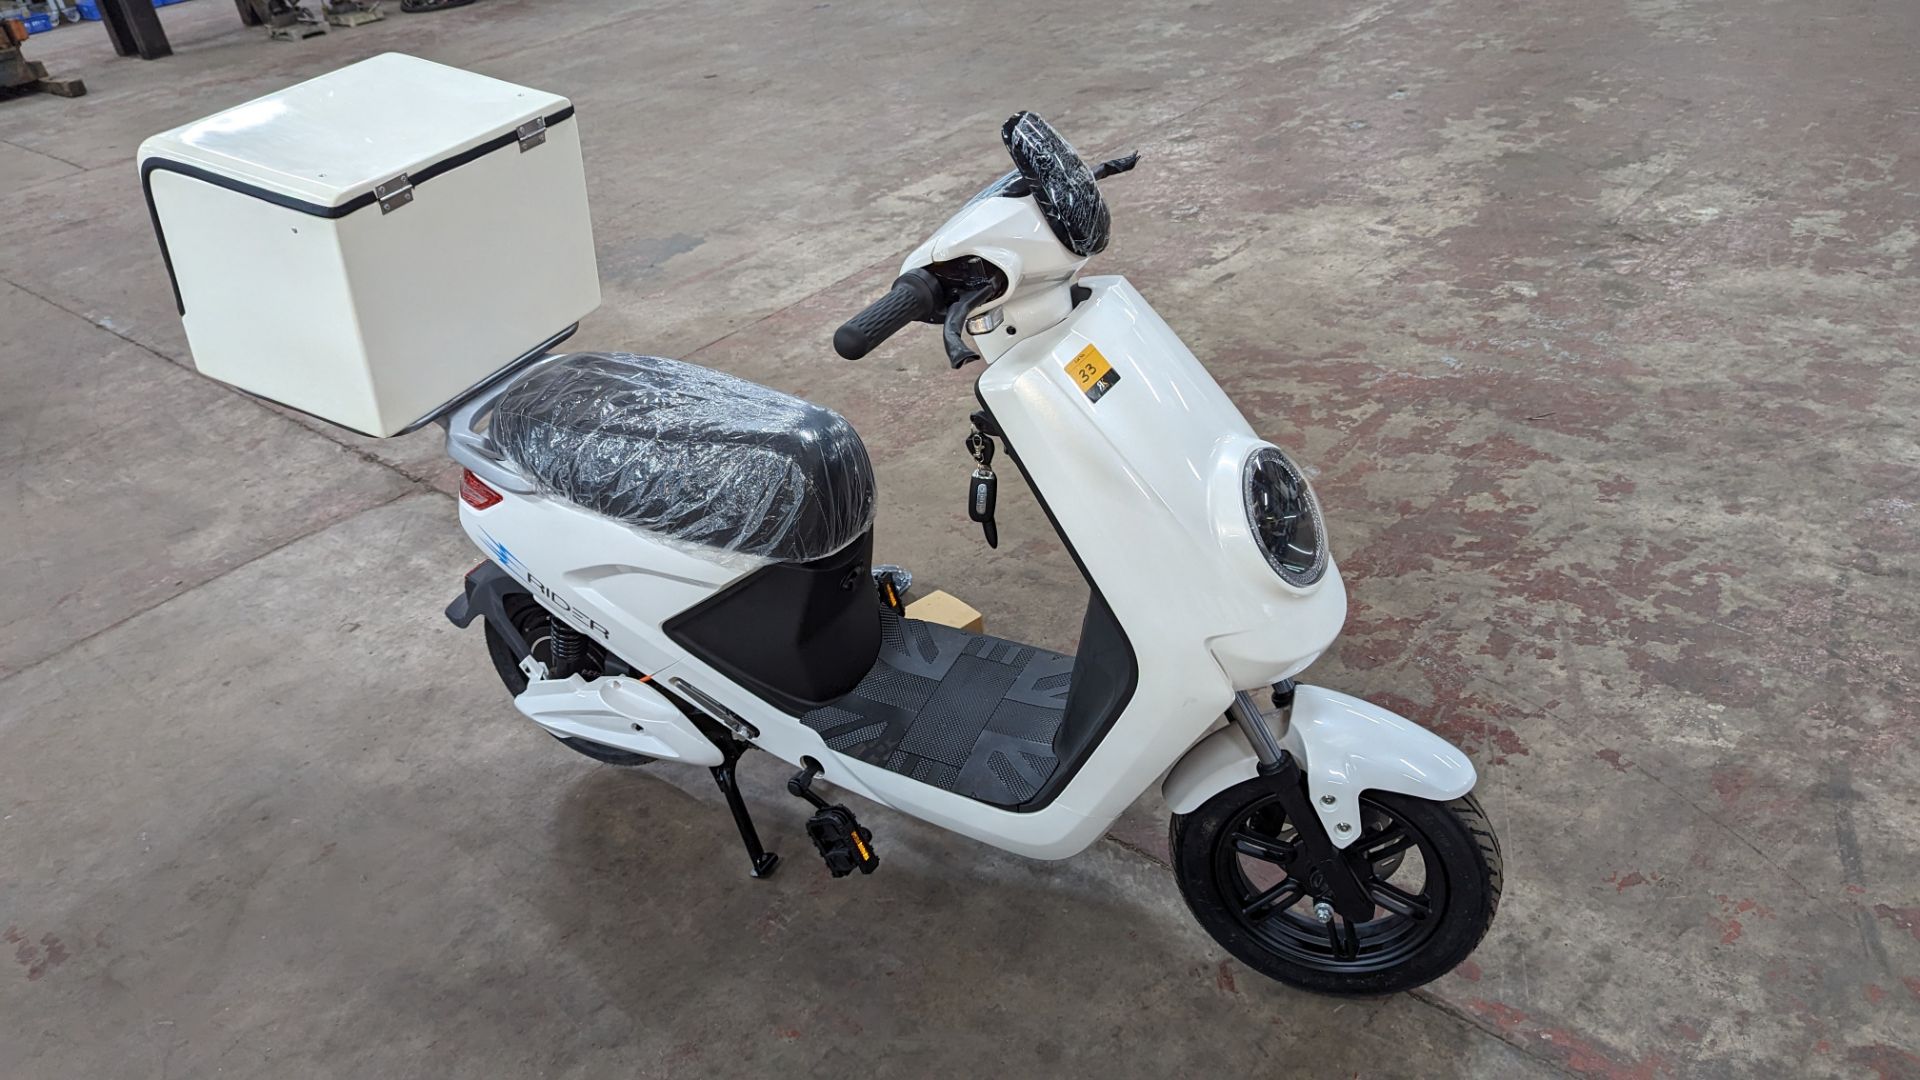 Model 18 Electric Bike: Zero (0) recorded miles, white body with black detailing, insulated box moun - Image 7 of 14